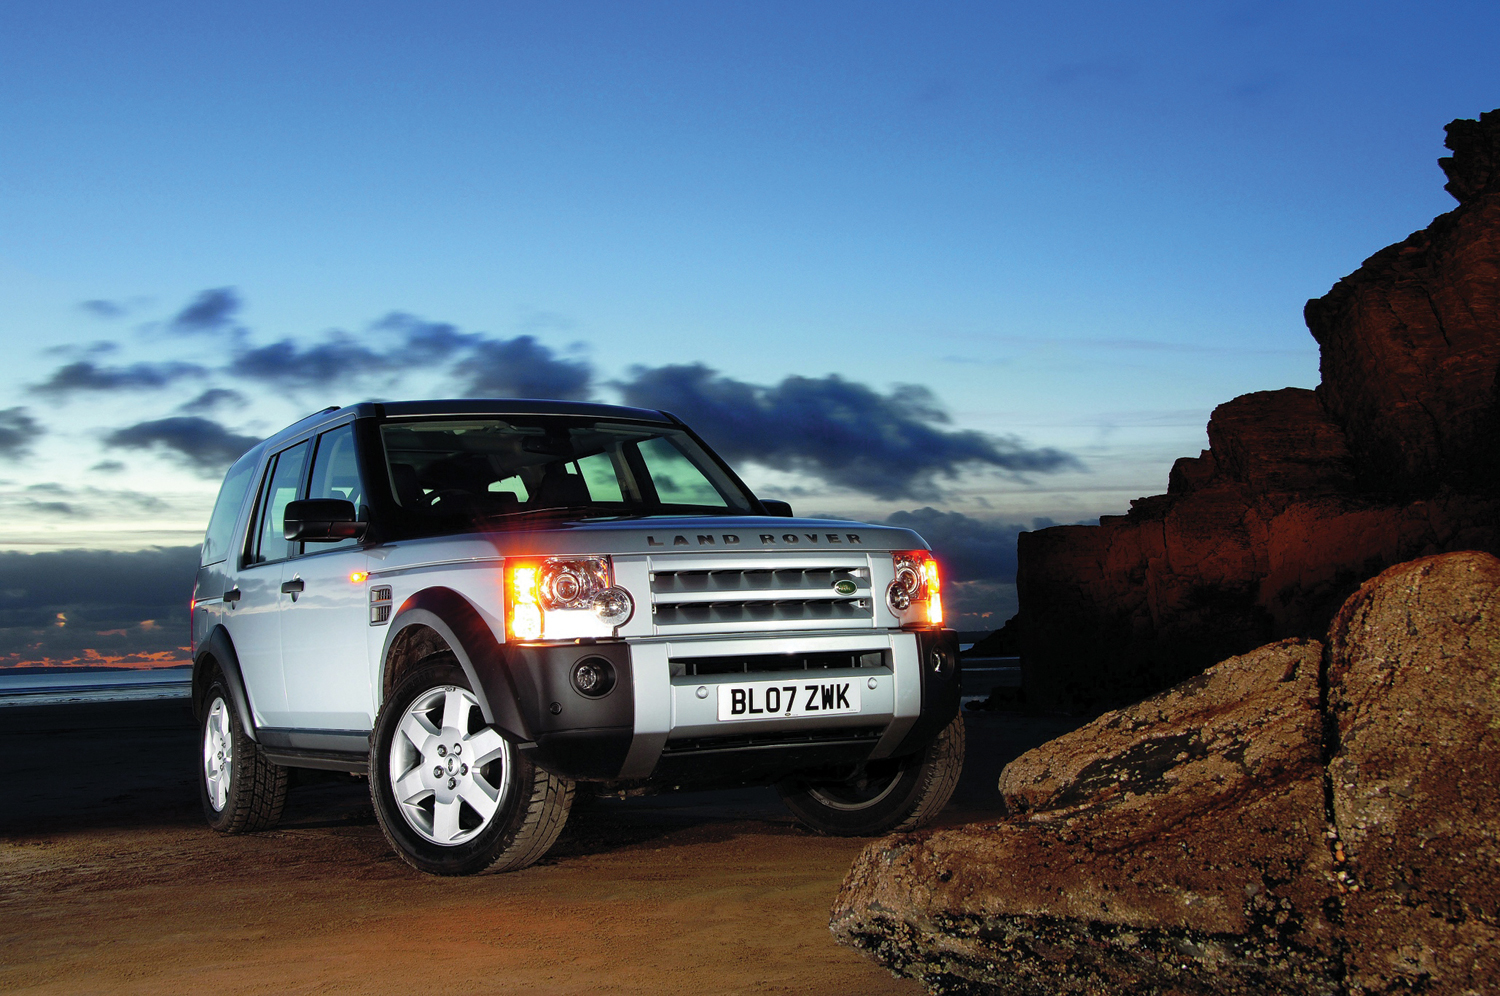 Discover f. Land Rover Discovery 3. Дискавери 3 4.4 бензин. Дискавери 4 или Фрилендер 2. Land Rover Discovery 3 вес.